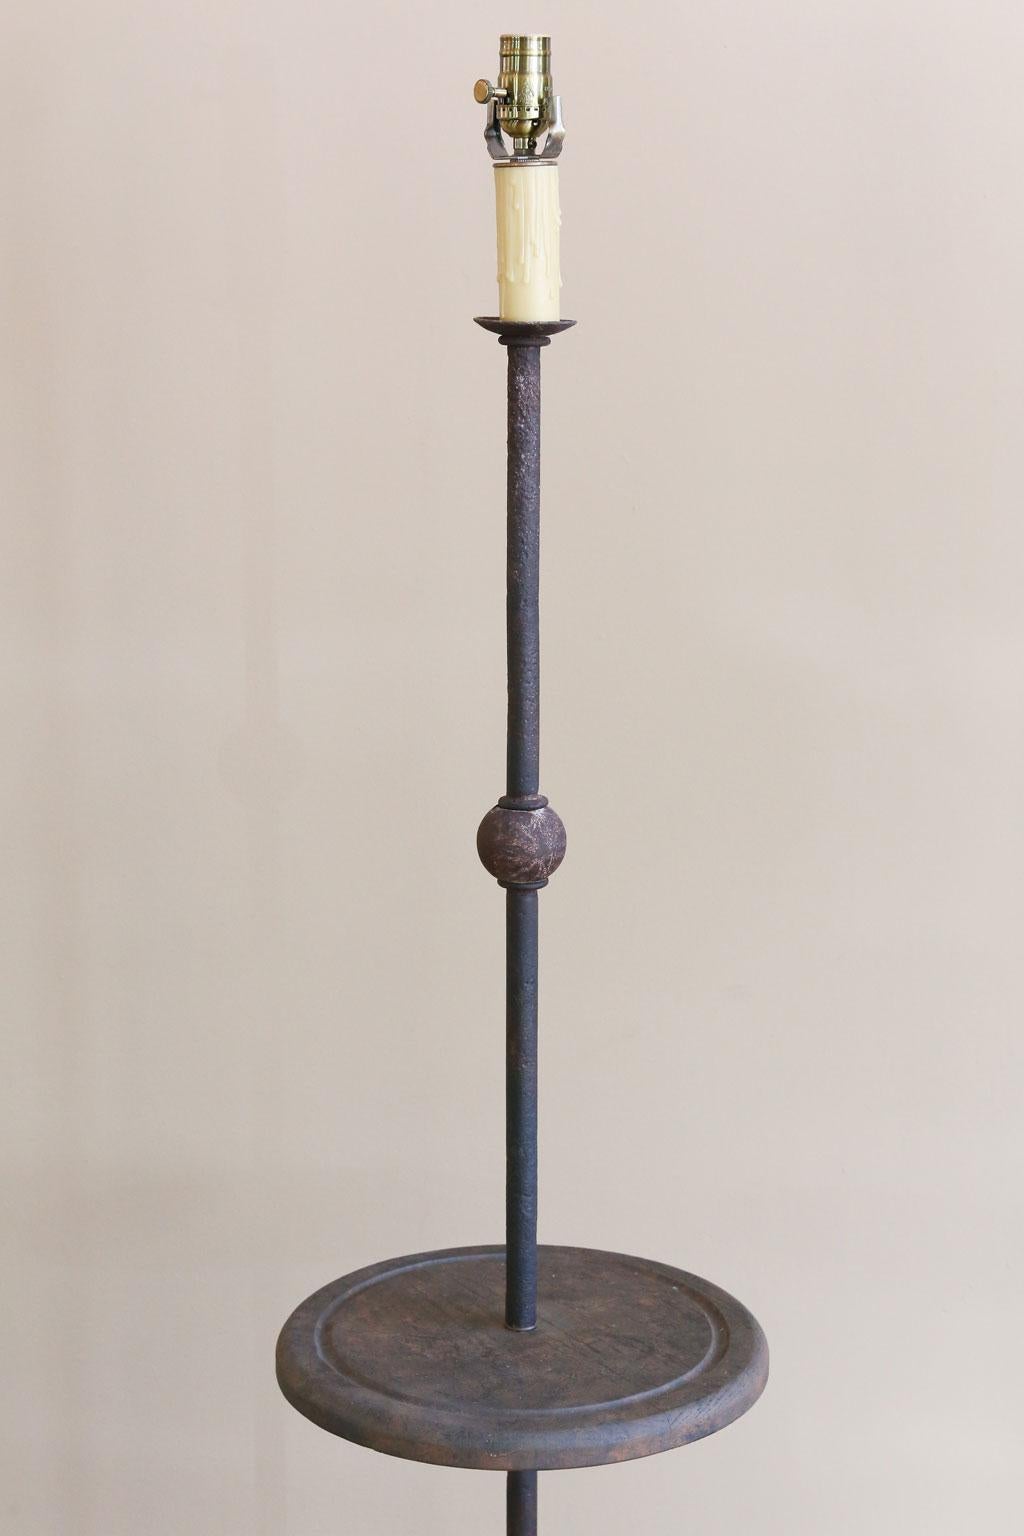 Custom Made Iron Floor Lamp with Oak Shelf That Functions as as a Side Table In Excellent Condition For Sale In Houston, TX